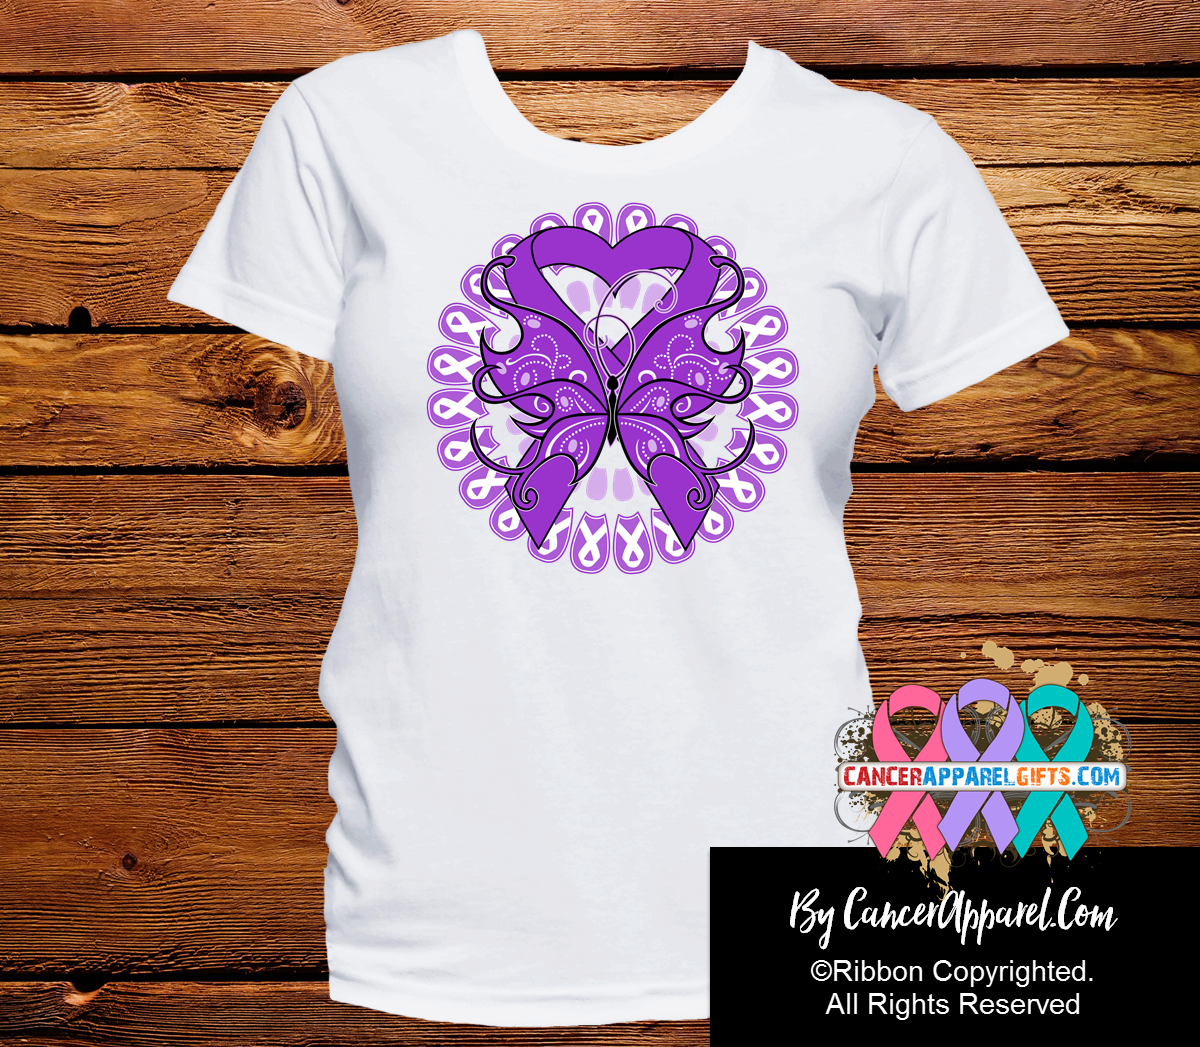 Pancreatic Cancer Stunning Butterfly Shirts - Cancer Apparel and Gifts